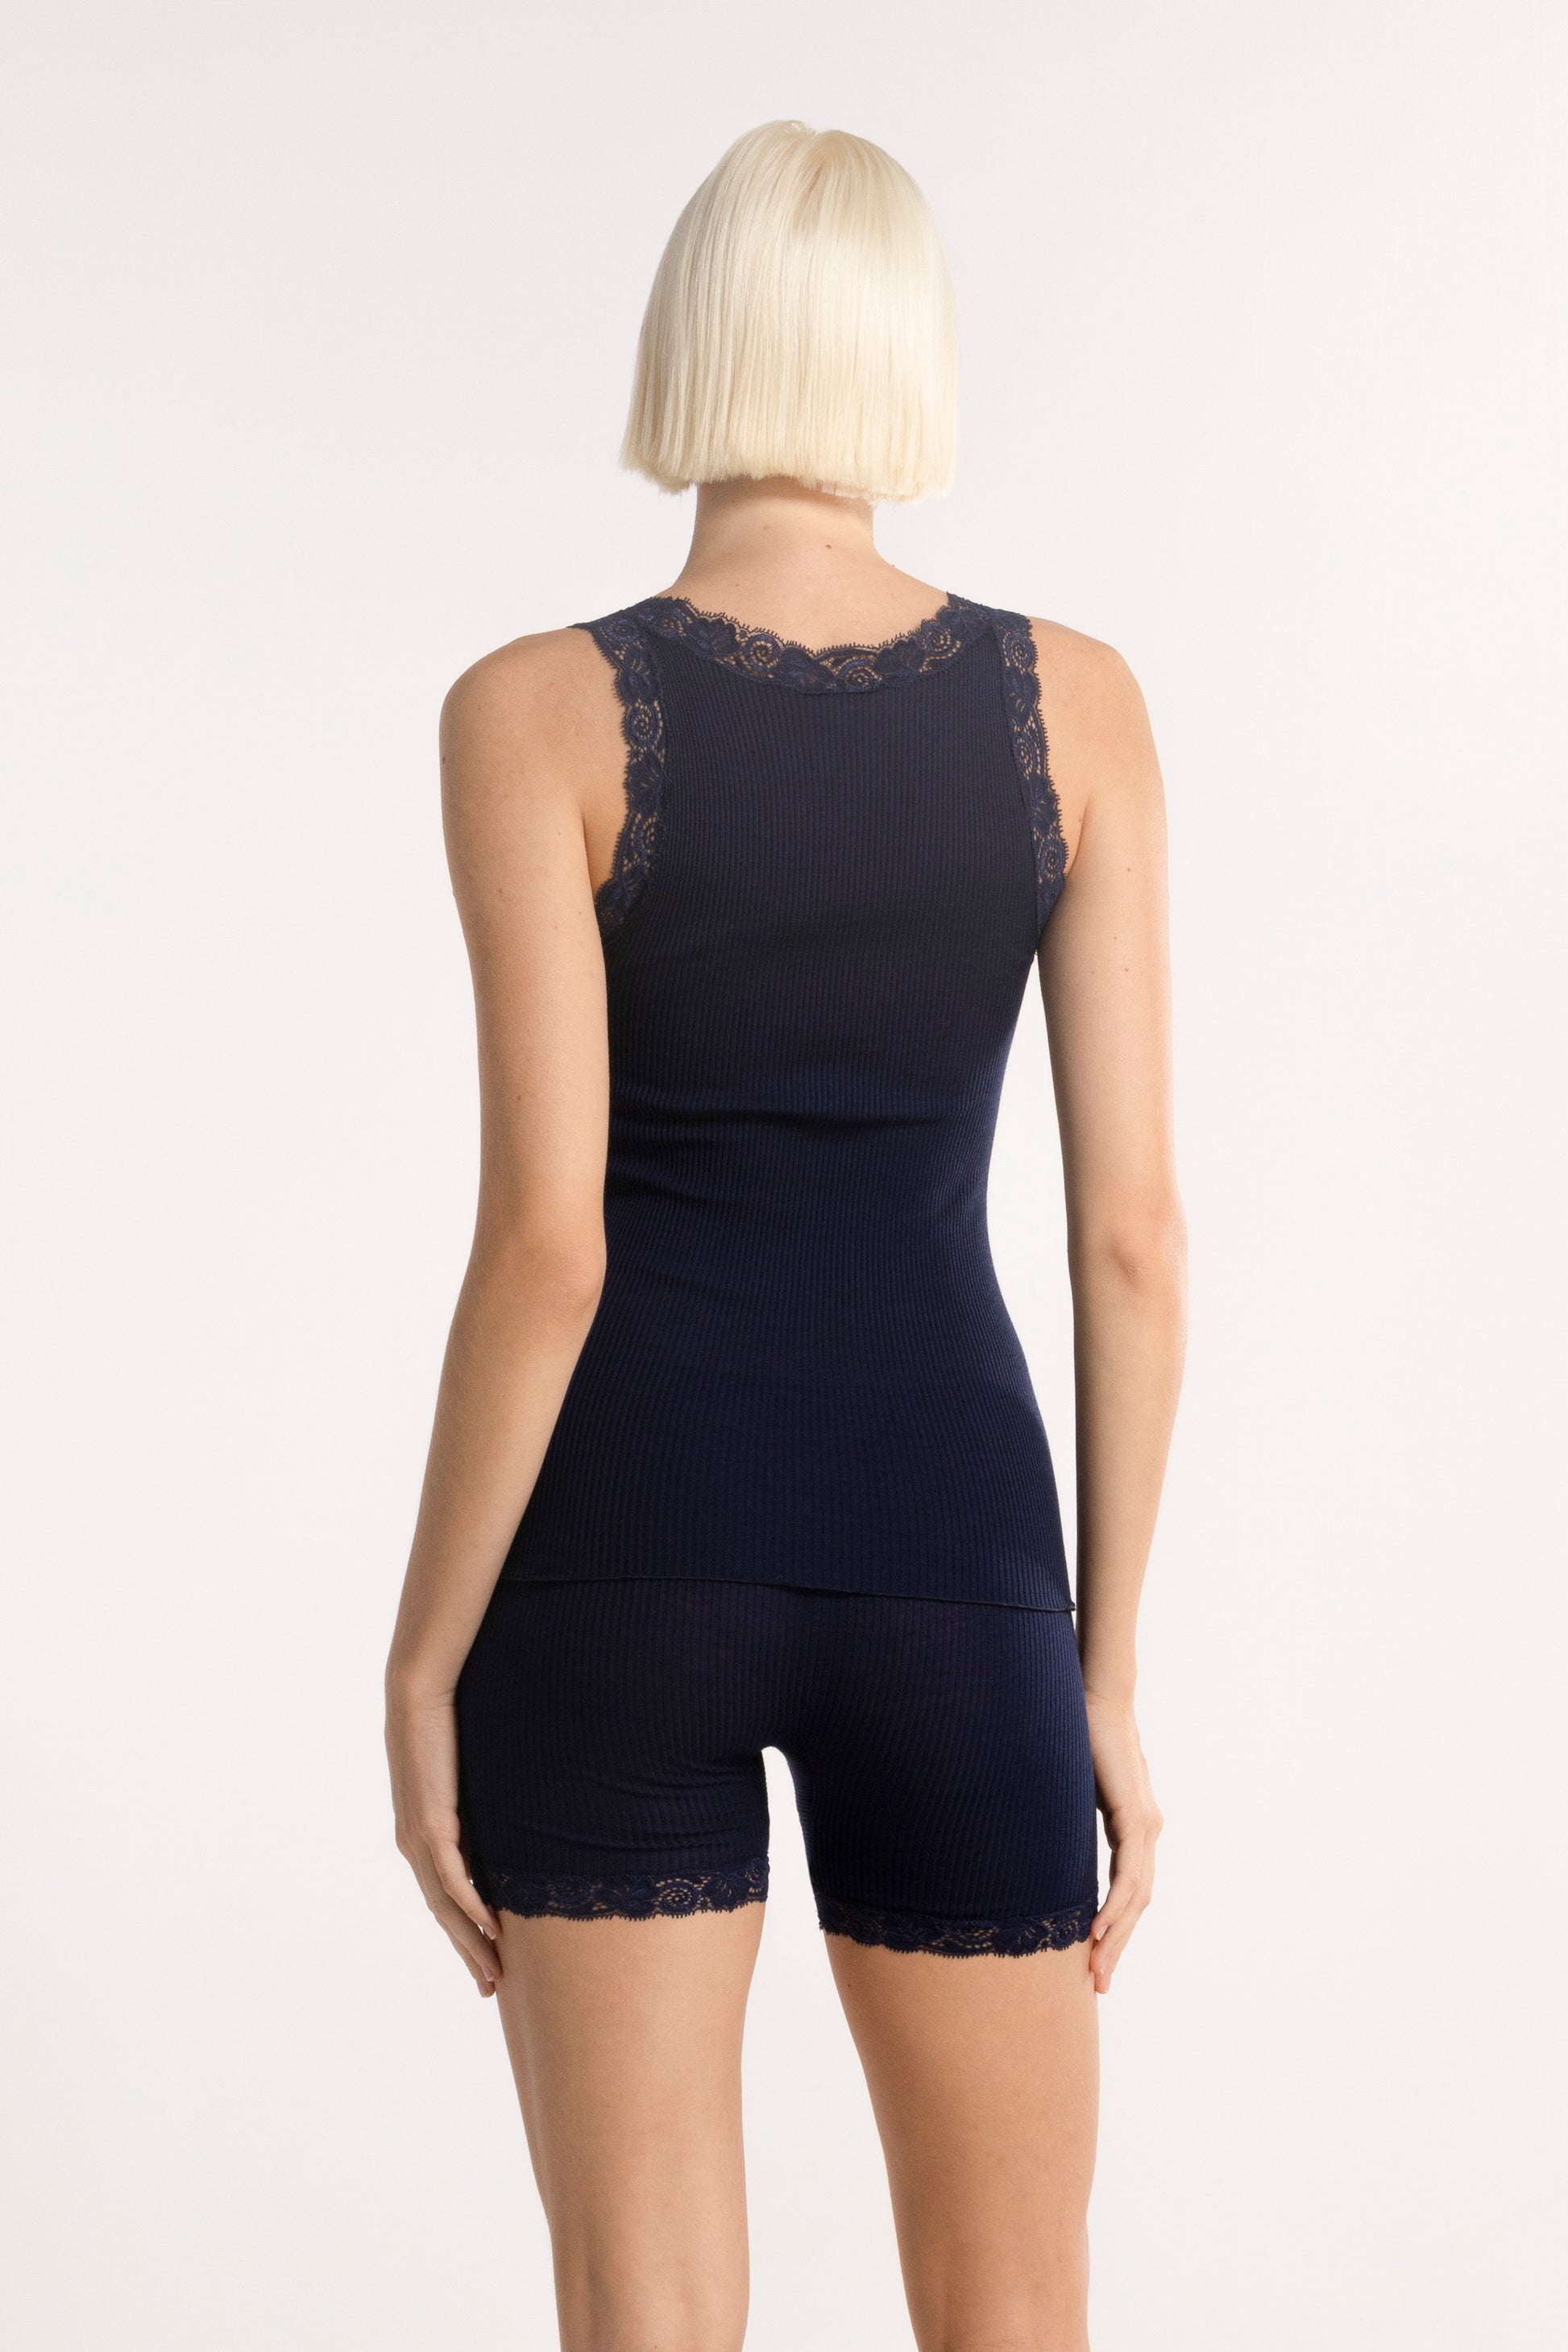 The Wool and Silk tank top with leavers lace 3410